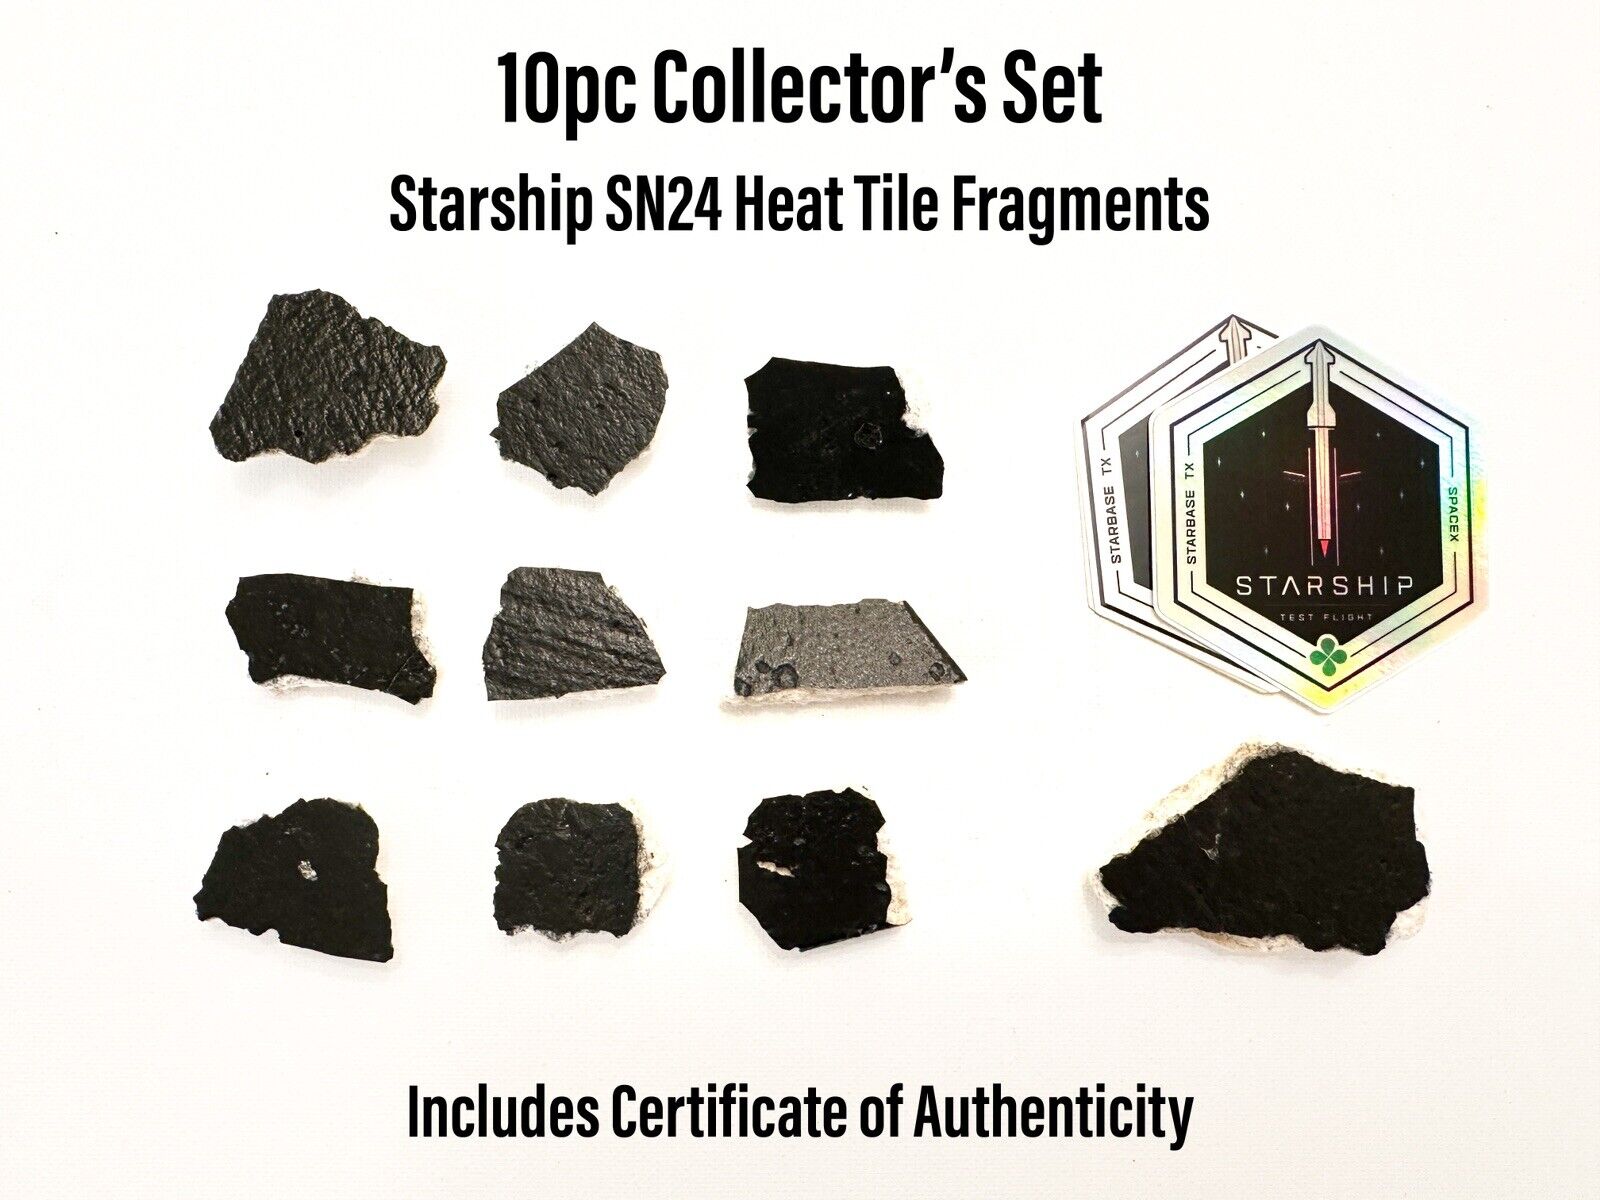 SpaceX Starship SN24 Heat Shield Tile Fragments & Sticker 10pc Collector’s Set